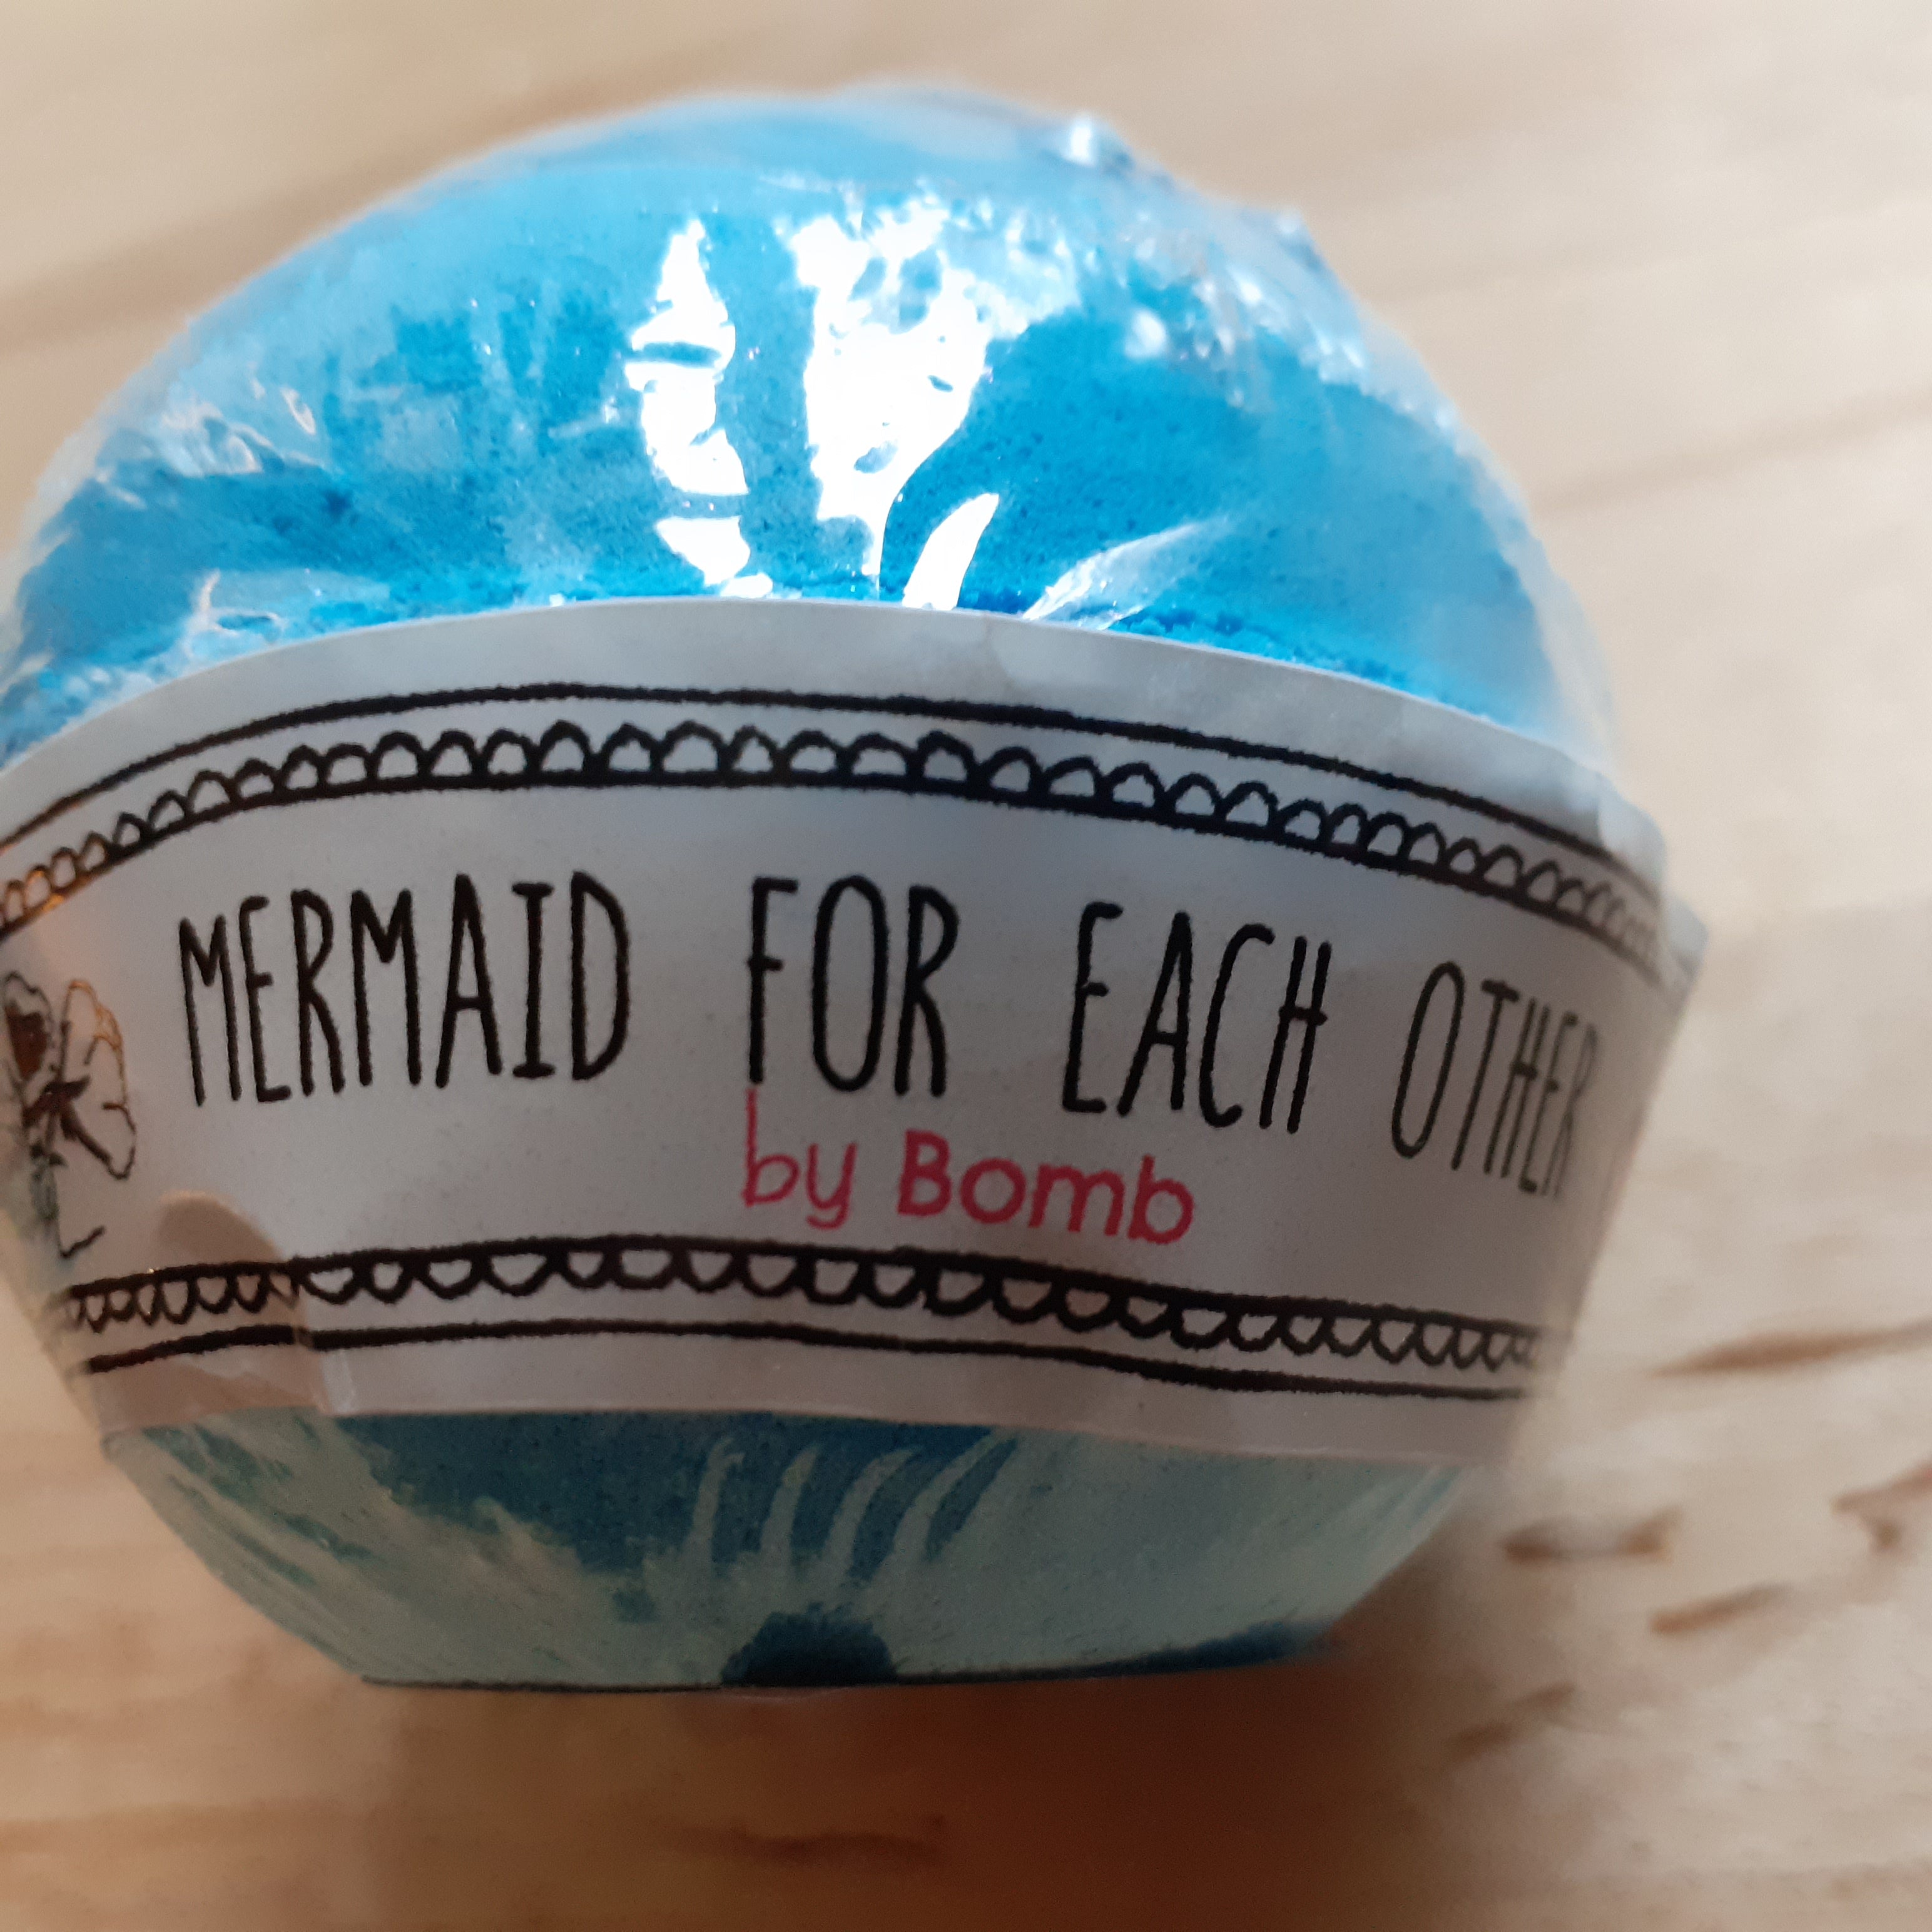 Mermaid for Each Other Bath Bomb - Luvit!